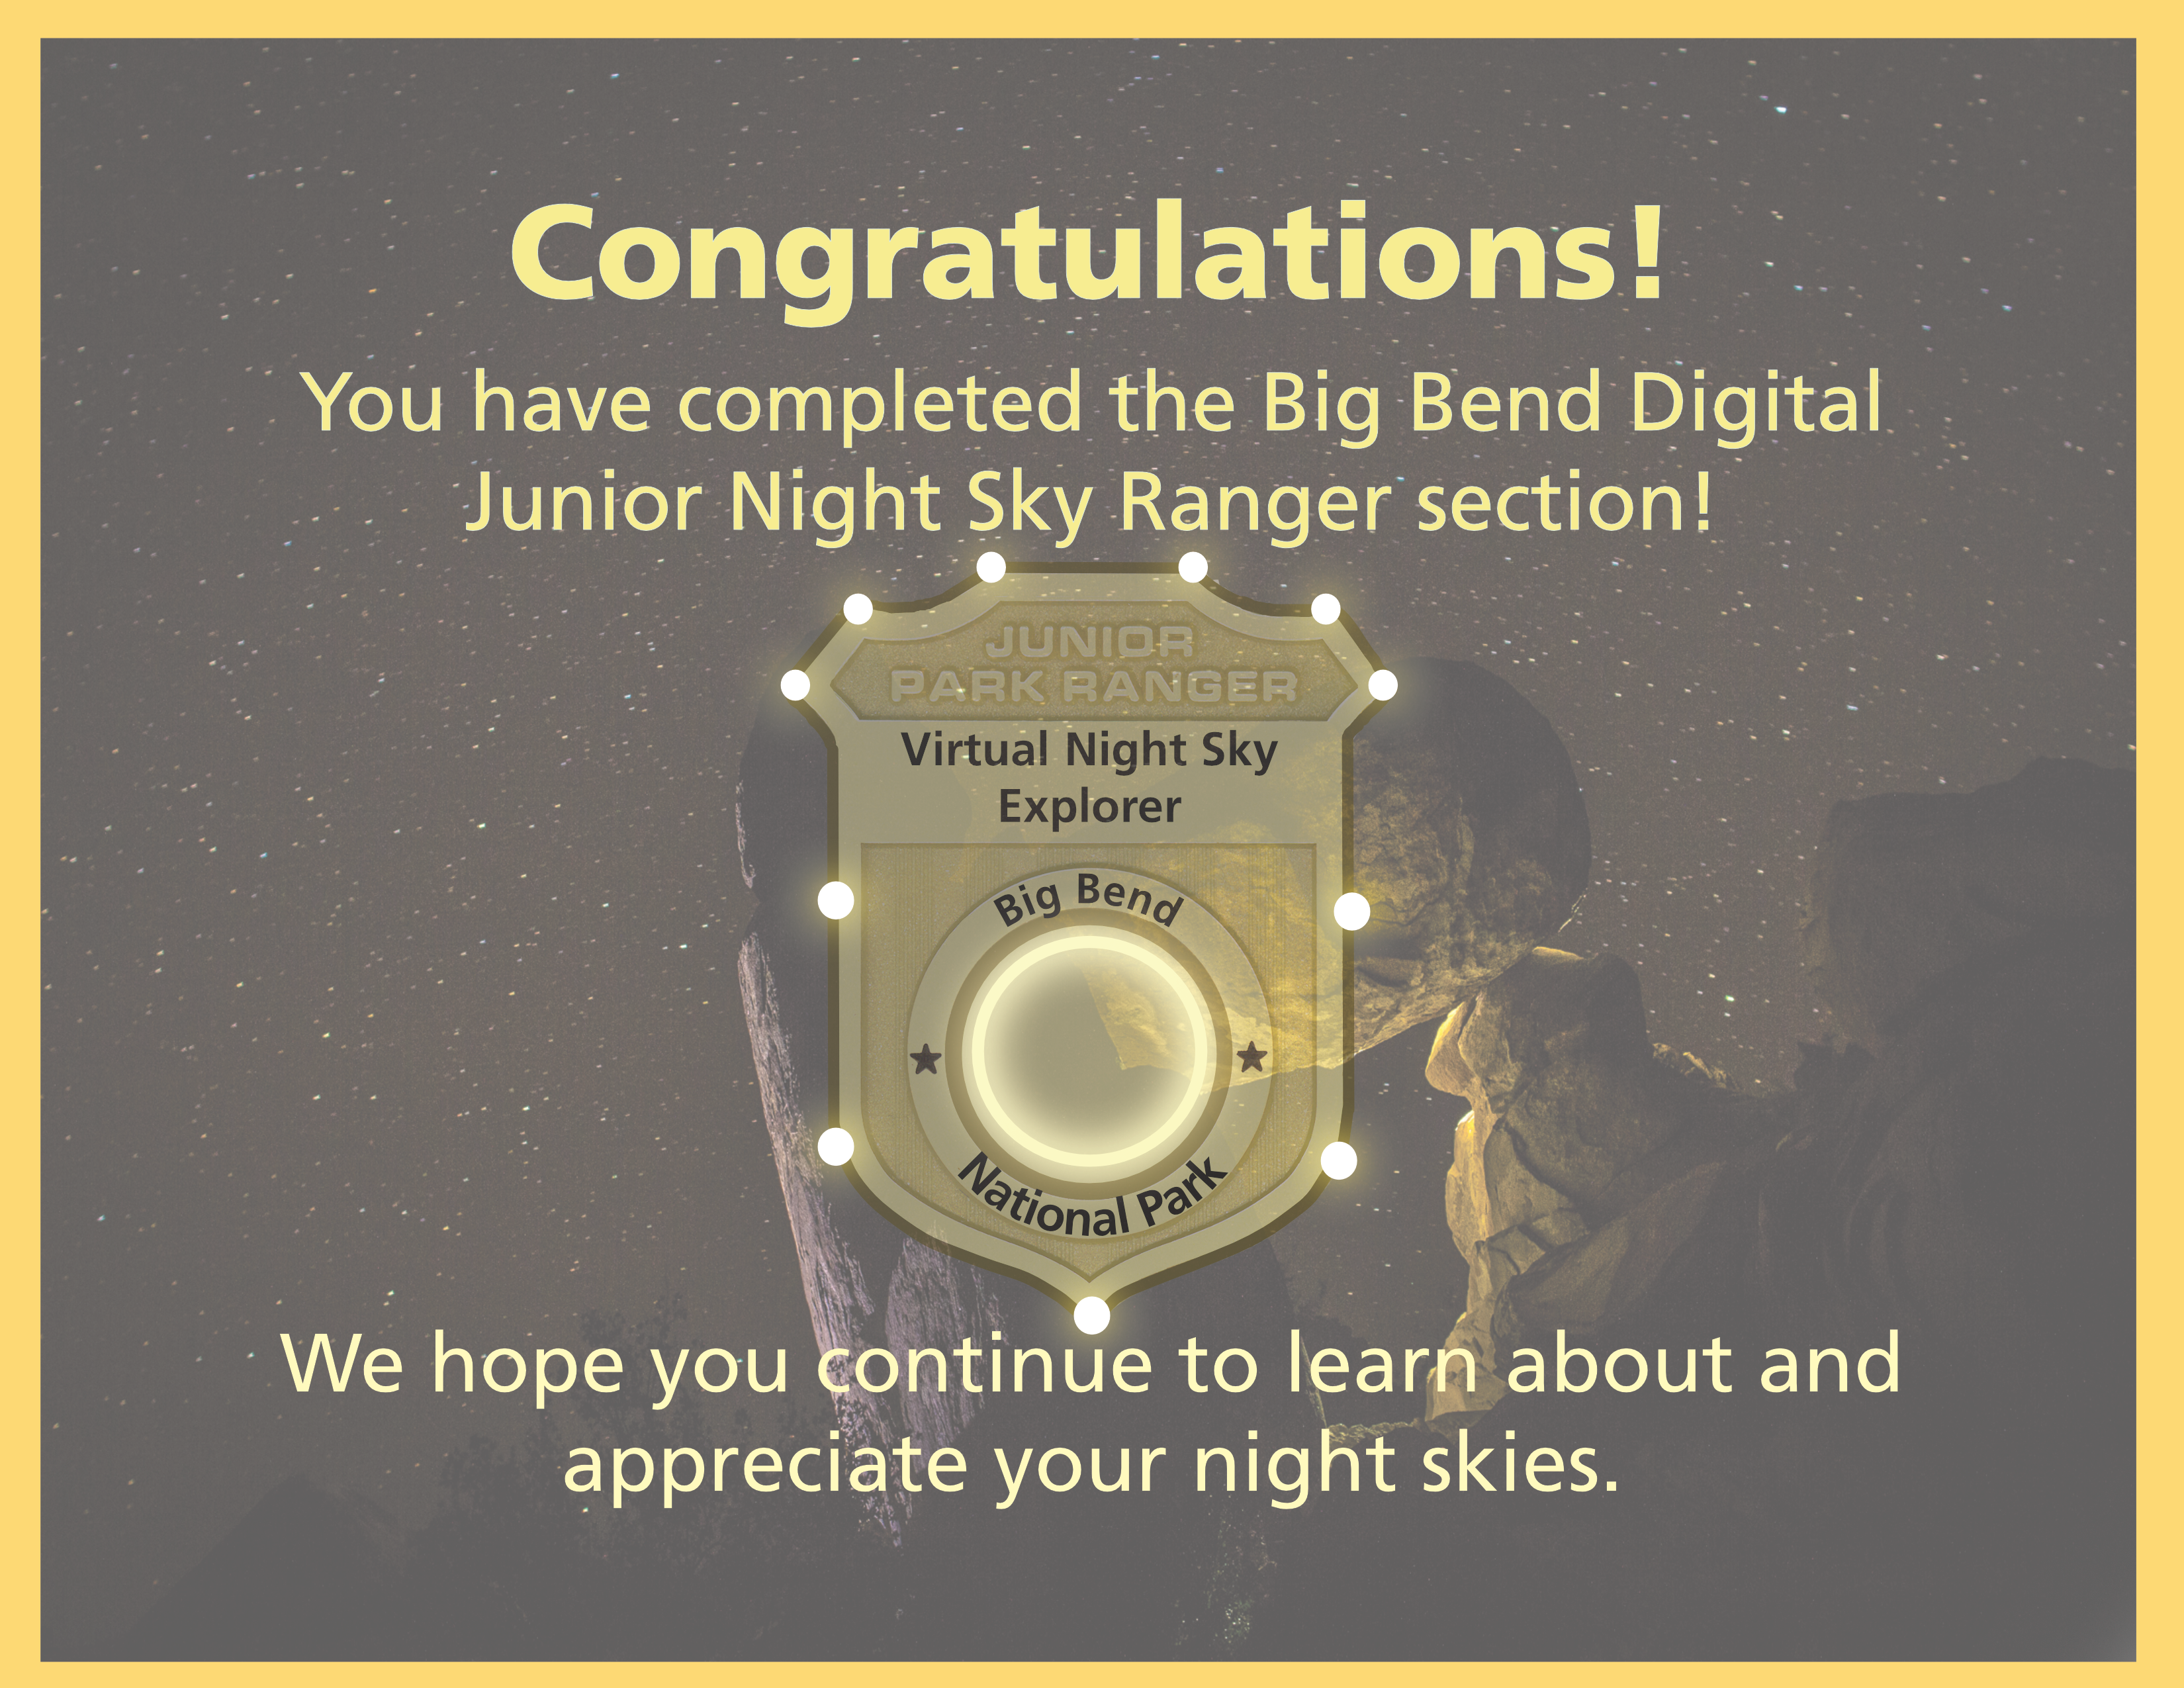 A certificate of completion with a Junior Ranger badge in the middle. The background image shows a starry night sky behind a rock formation. The badge has glowing dots on the outside like stars, and a glowing circle in the center